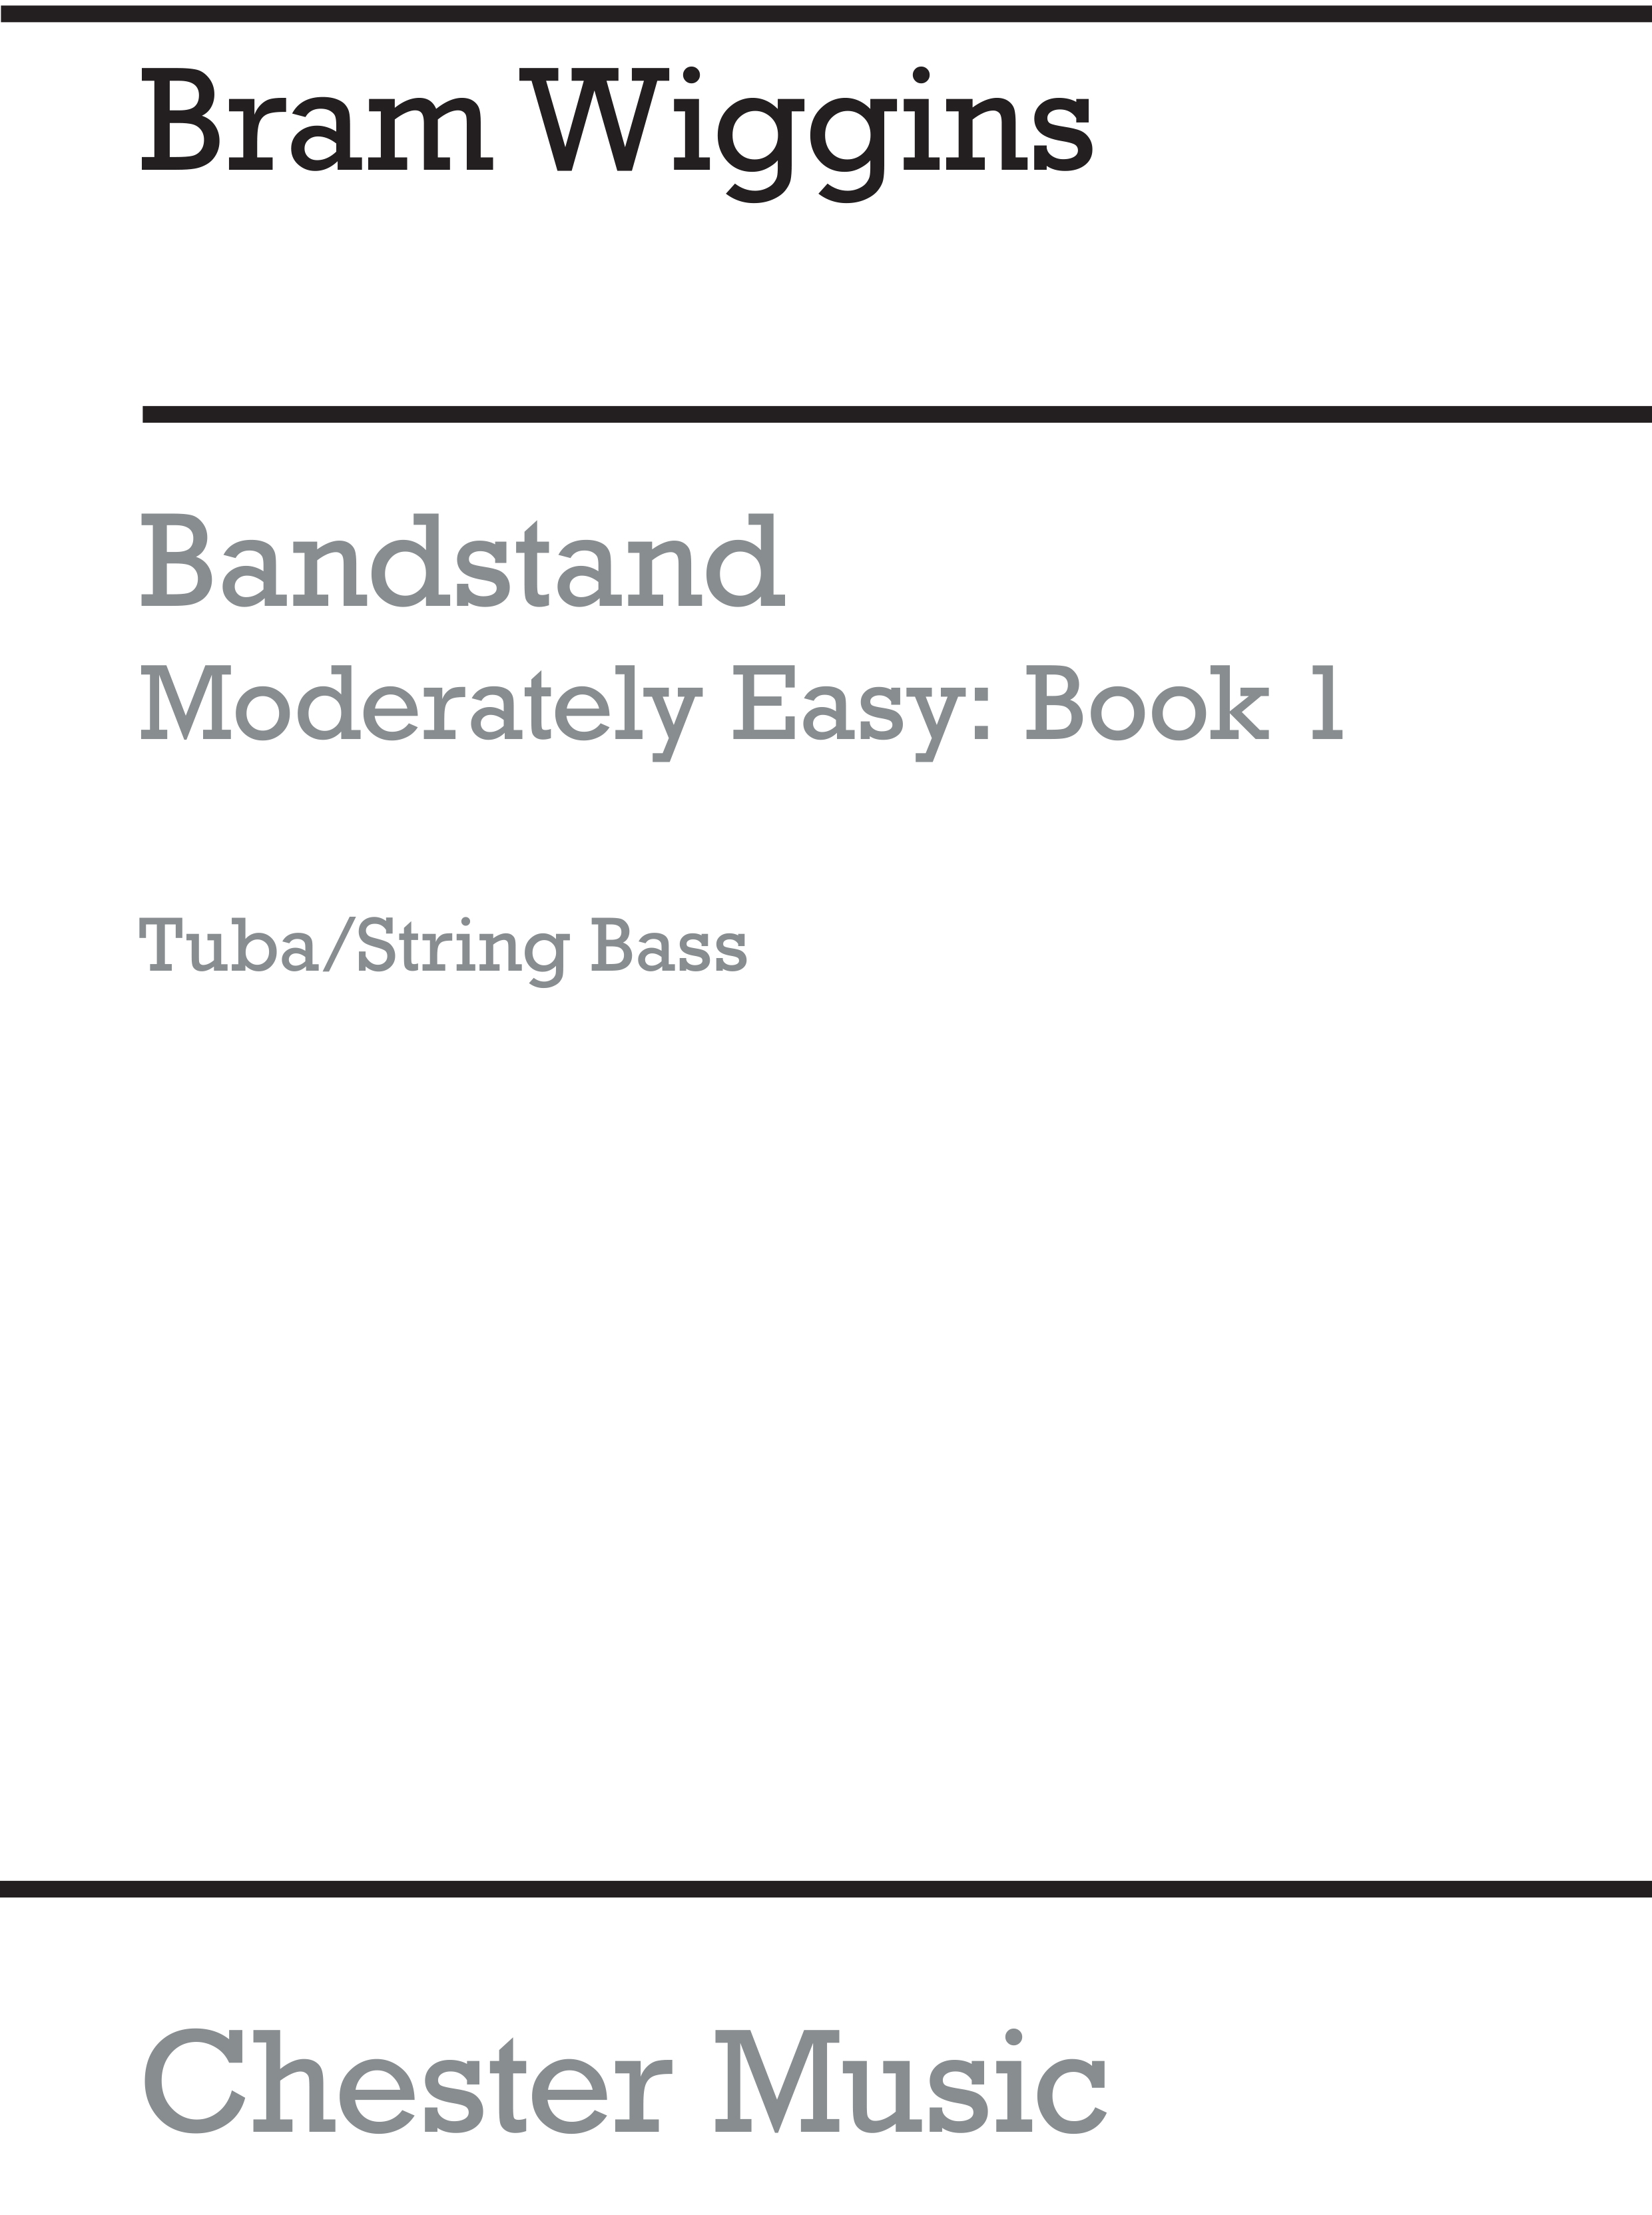 Bram Wiggins: Bandstand Moderately Easy Book 1 (Tuba  Bass): Concert Band: Part